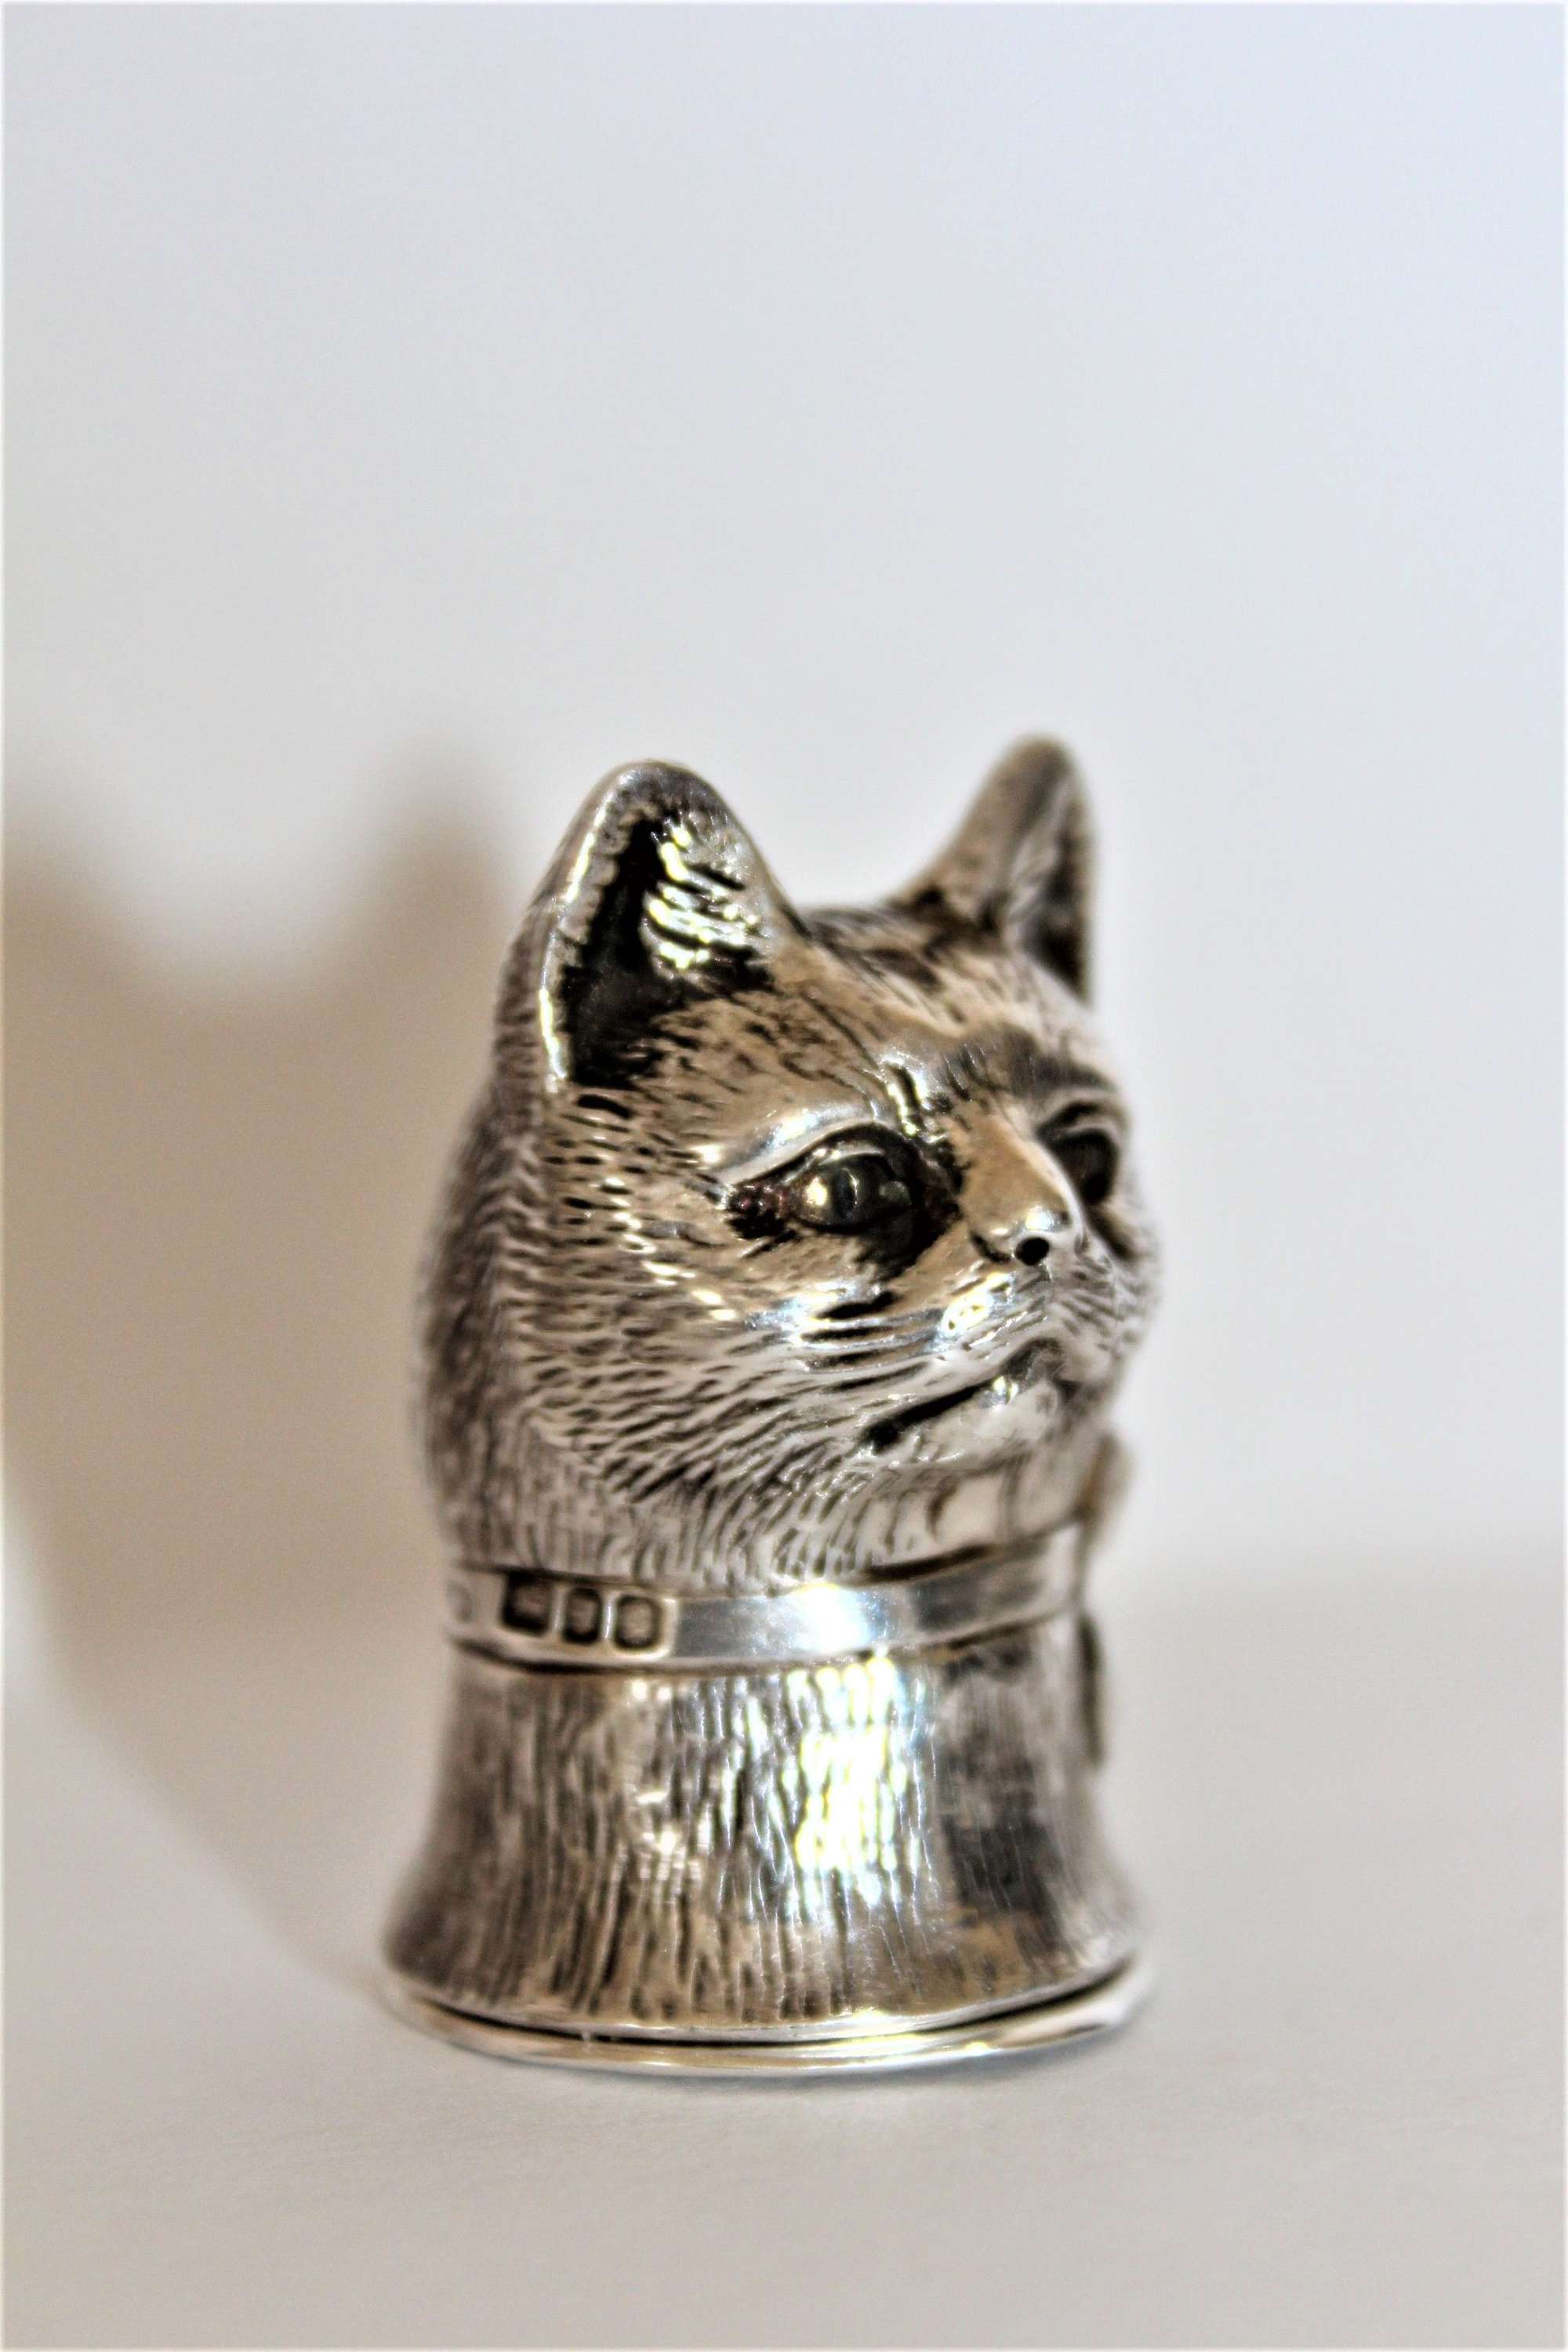 A Well Defined And Cute Silver Vesta Case In The Form Of A Cat